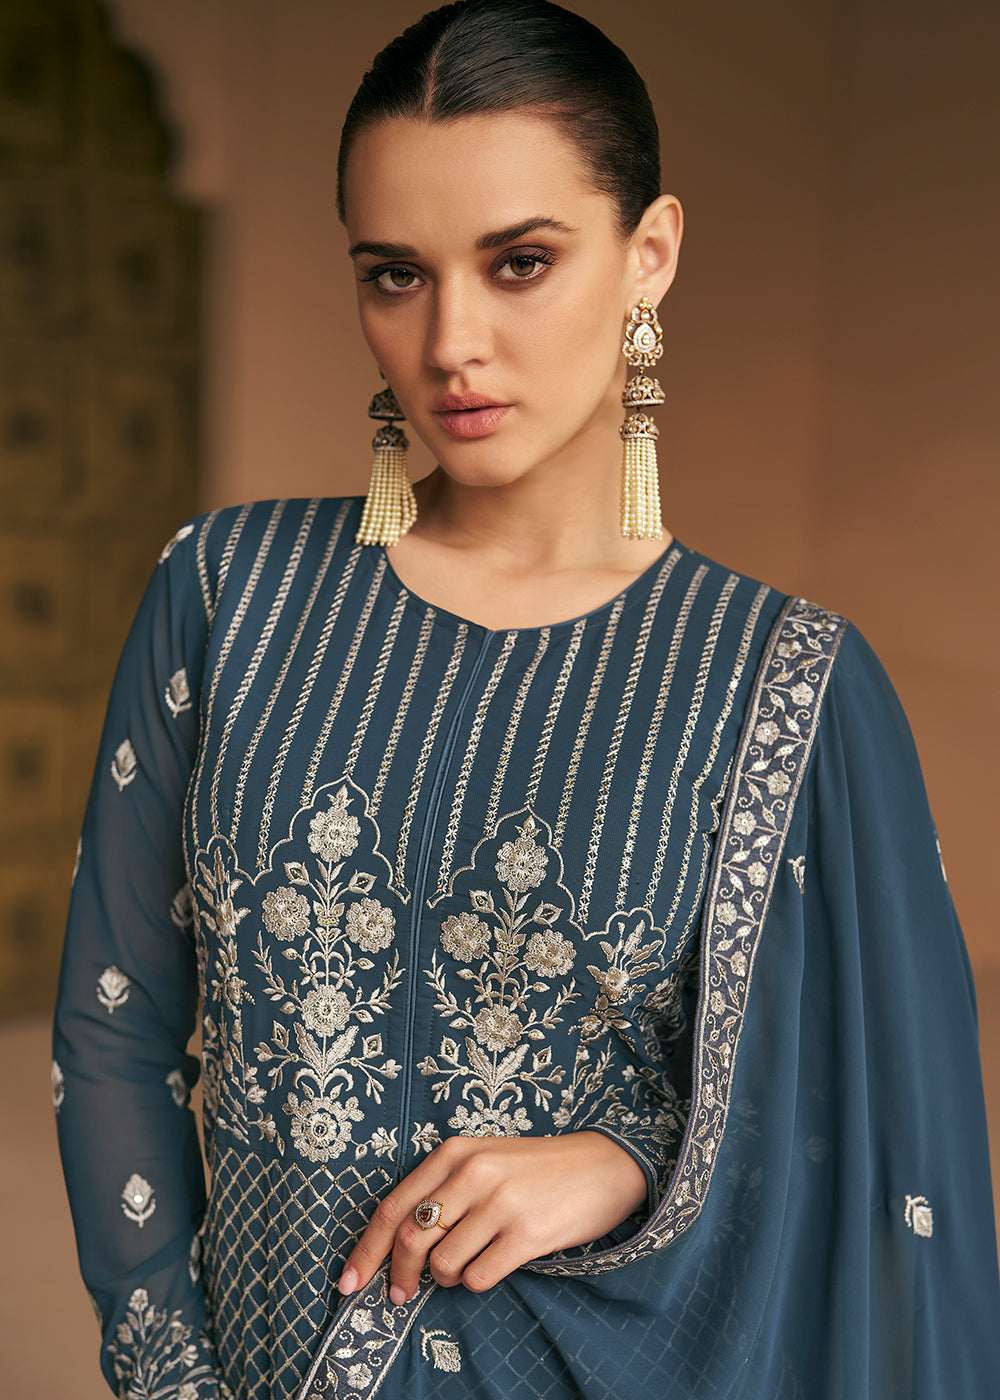 Buy Now Tempting Real Georgette Blue Wedding Wear Anarkali Suit Online in USA, UK, Australia, New Zealand, Canada & Worldwide at Empress Clothing.